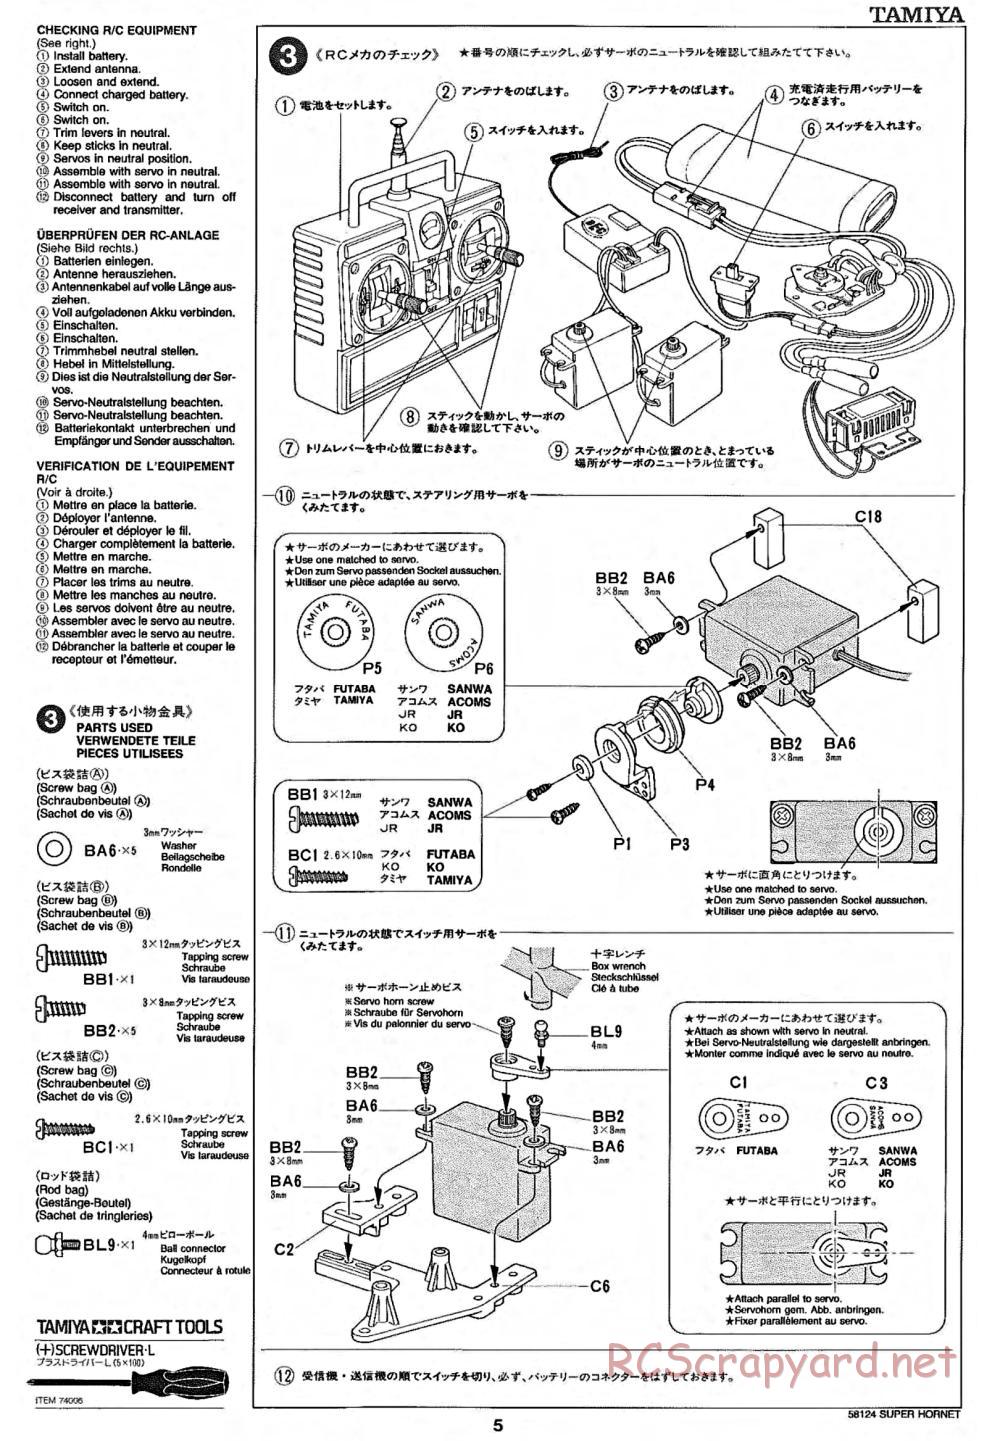 Tamiya - Super Hornet Chassis - Manual - Page 5